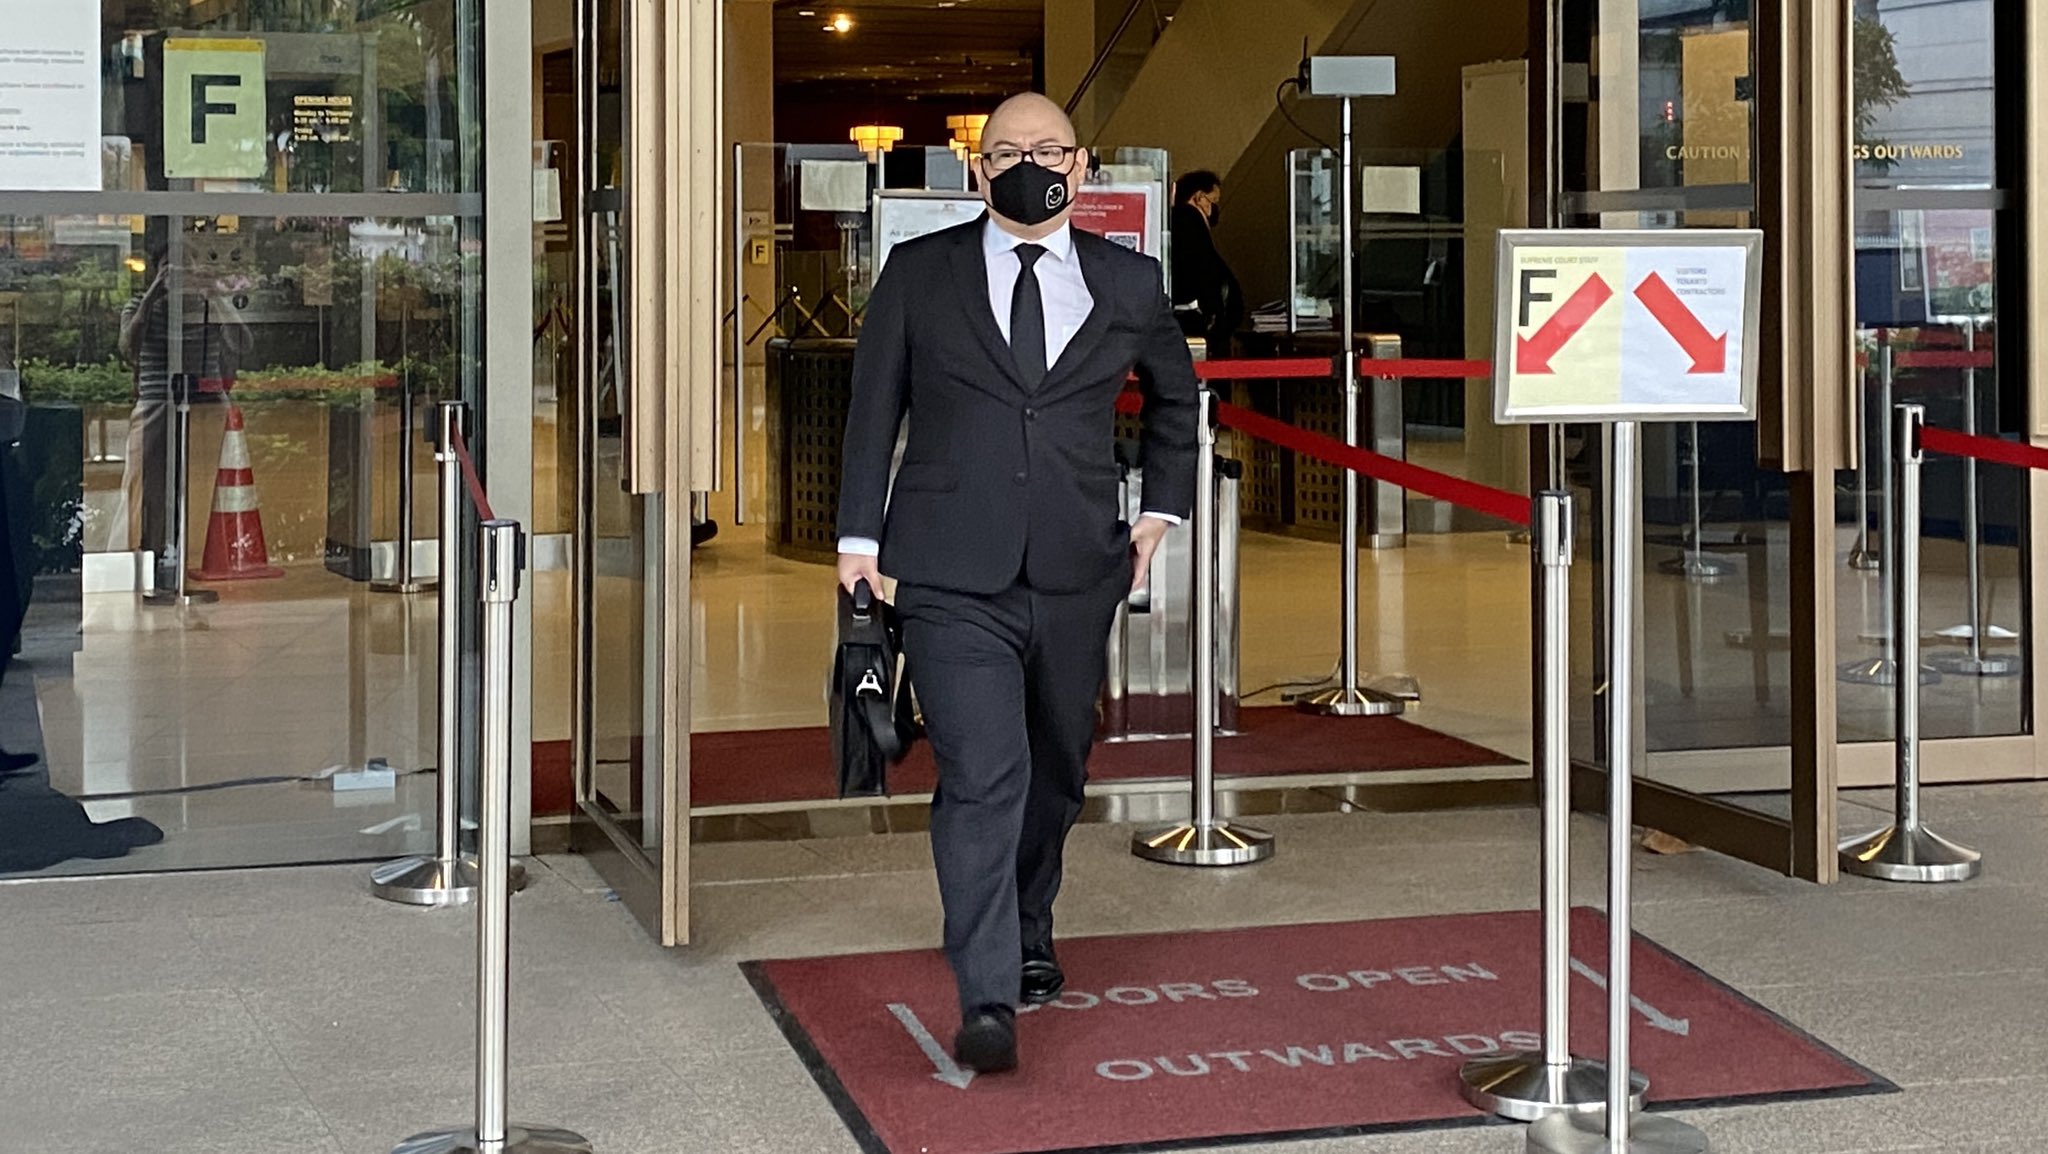 The Online Citizen editor Terry Xu walks out of the Supreme Court building on Nov. 30, 2020. Photo Carolyn Teo/Coconuts